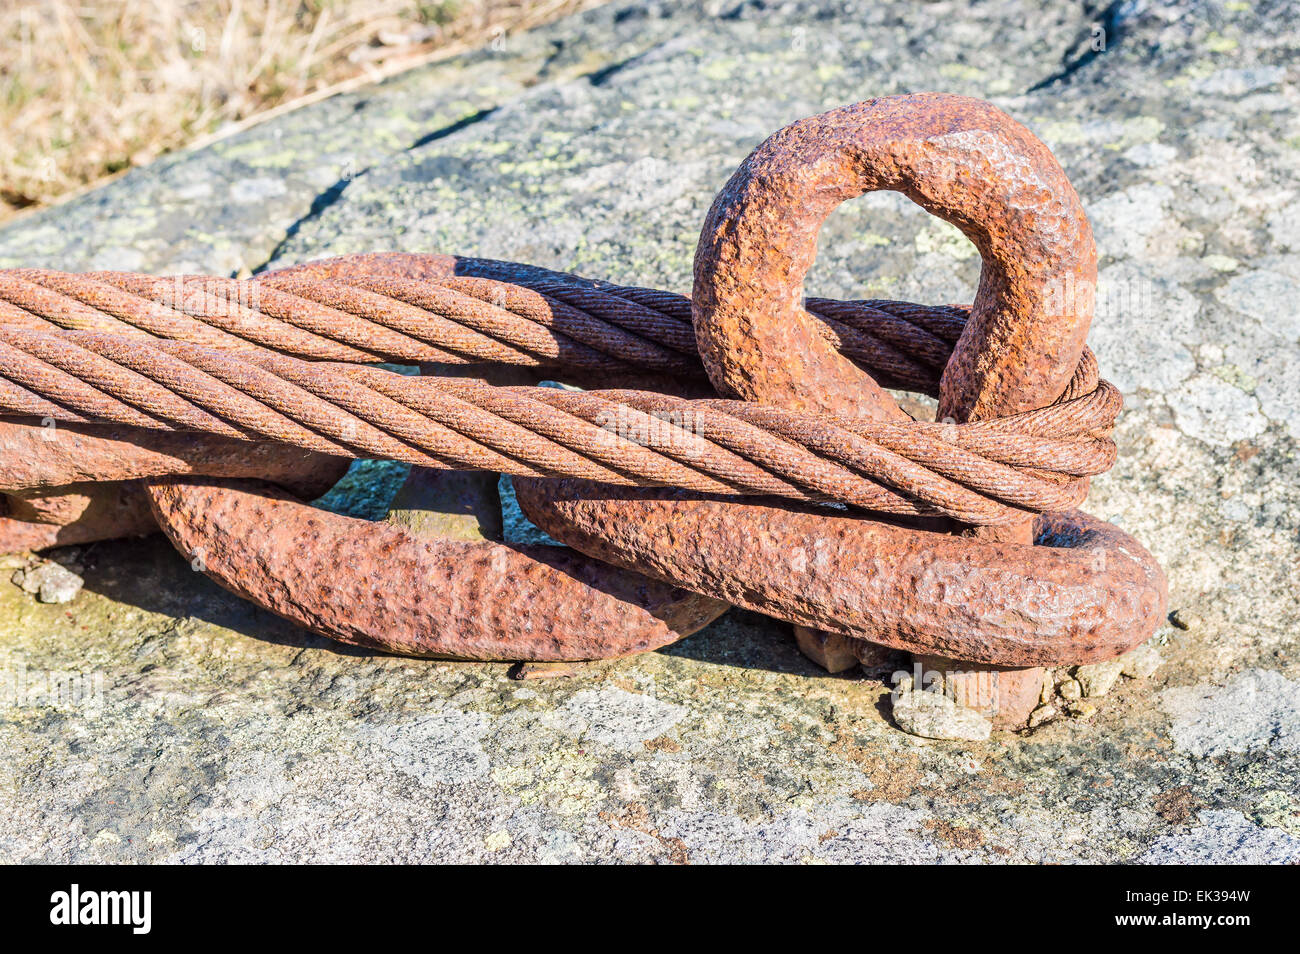 Rusty old chain and wire looped and anchored to the rock face to secure heavy loads. Stock Photo